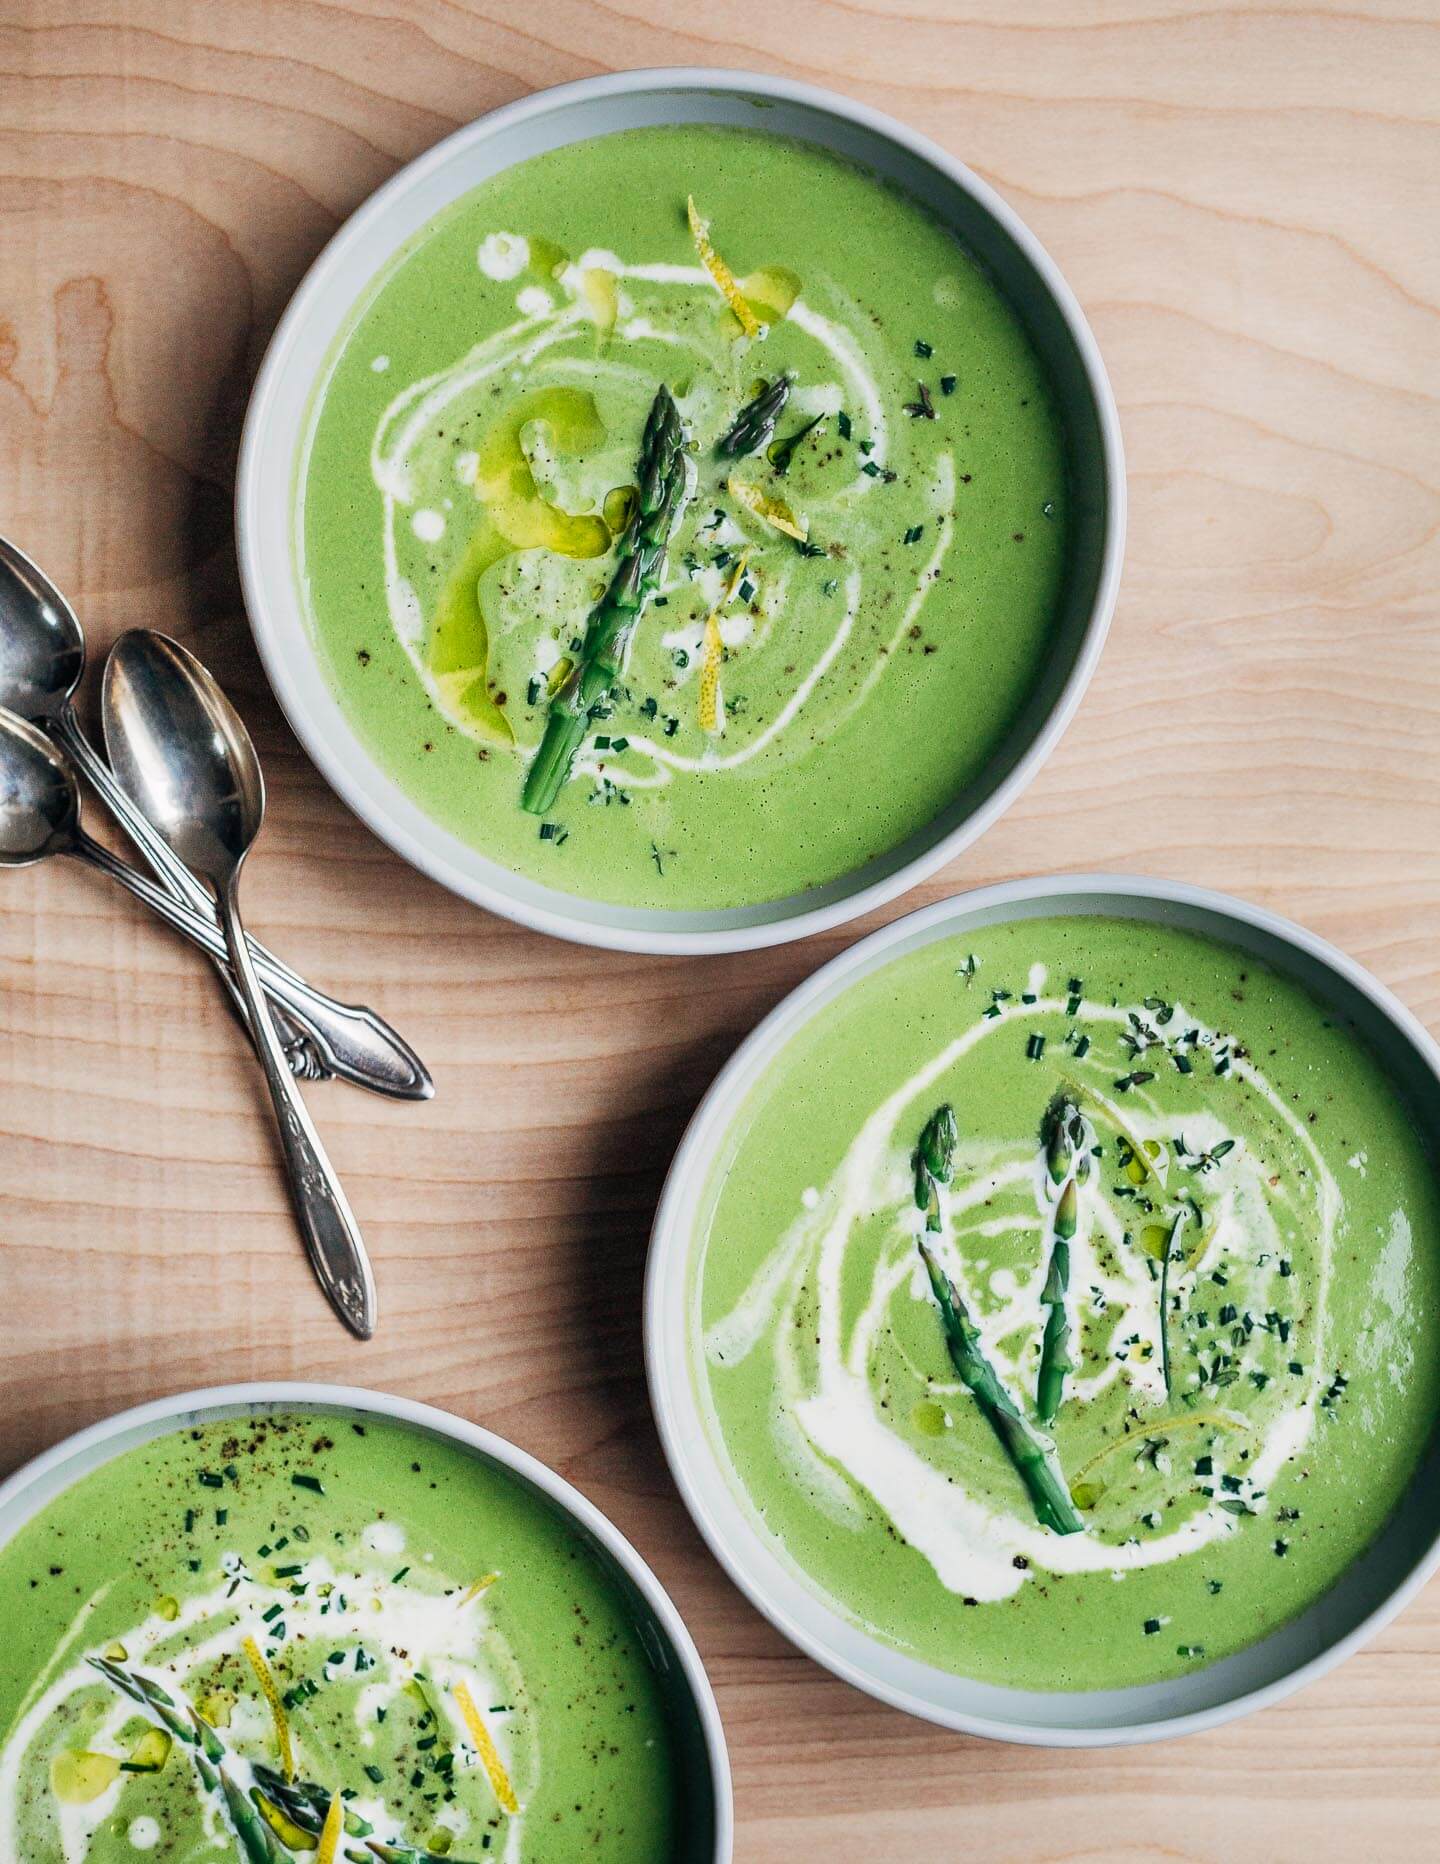 A vibrant, bright green cream of asparagus soup recipe that comes together on the stovetop in about 30 minutes.